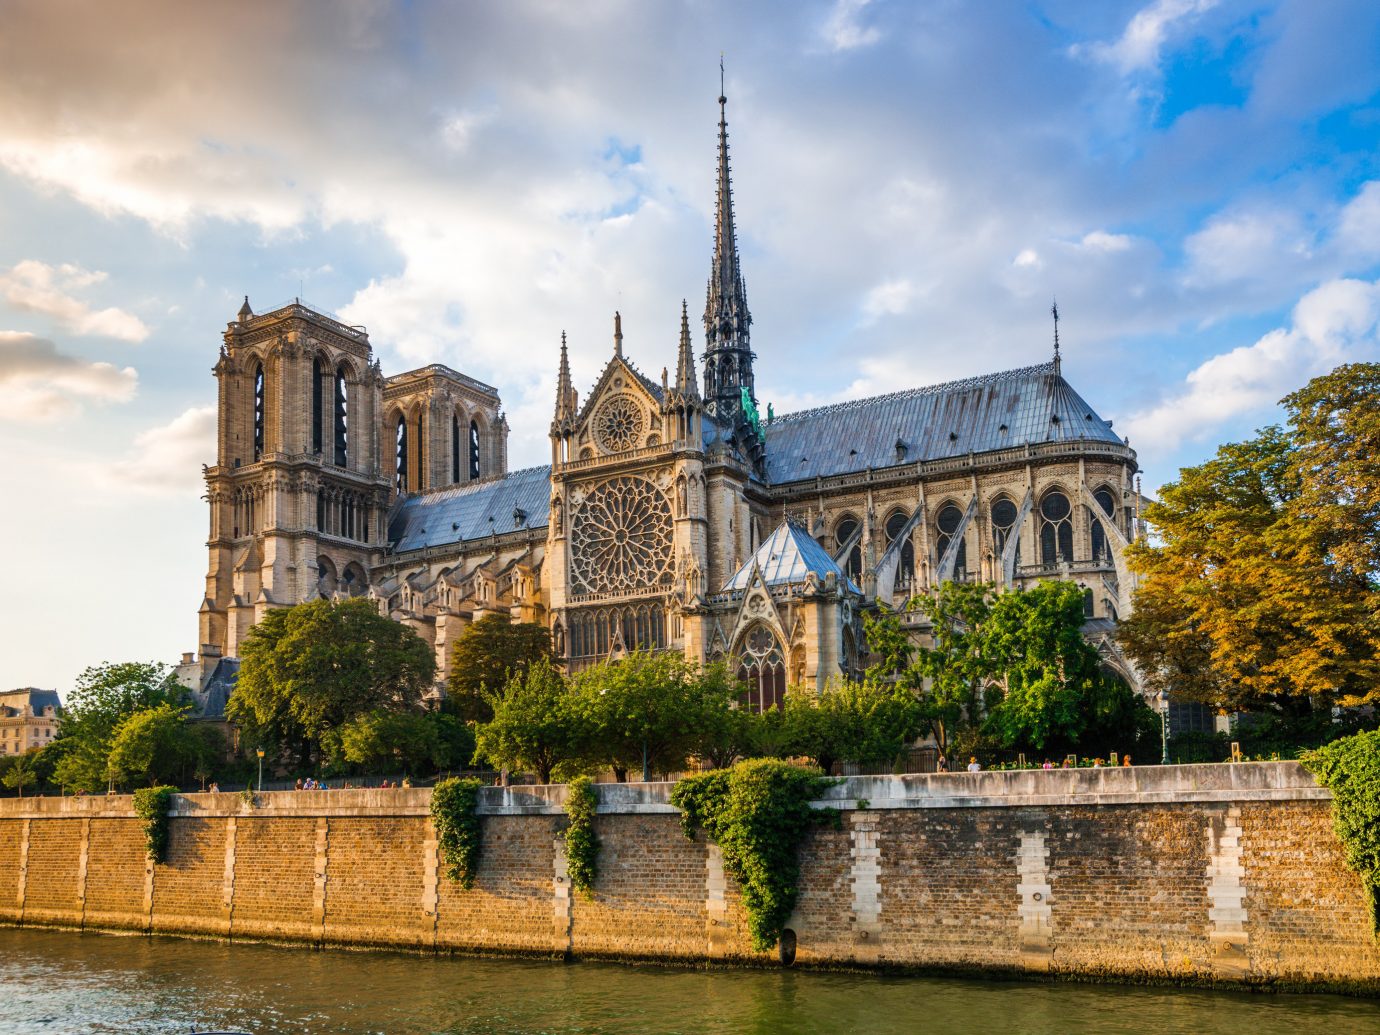 France Paris Trip Ideas outdoor sky château water castle landmark building River stately home tourism estate castle reflection place of worship waterway moat palace cathedral Church cityscape monastery stone day